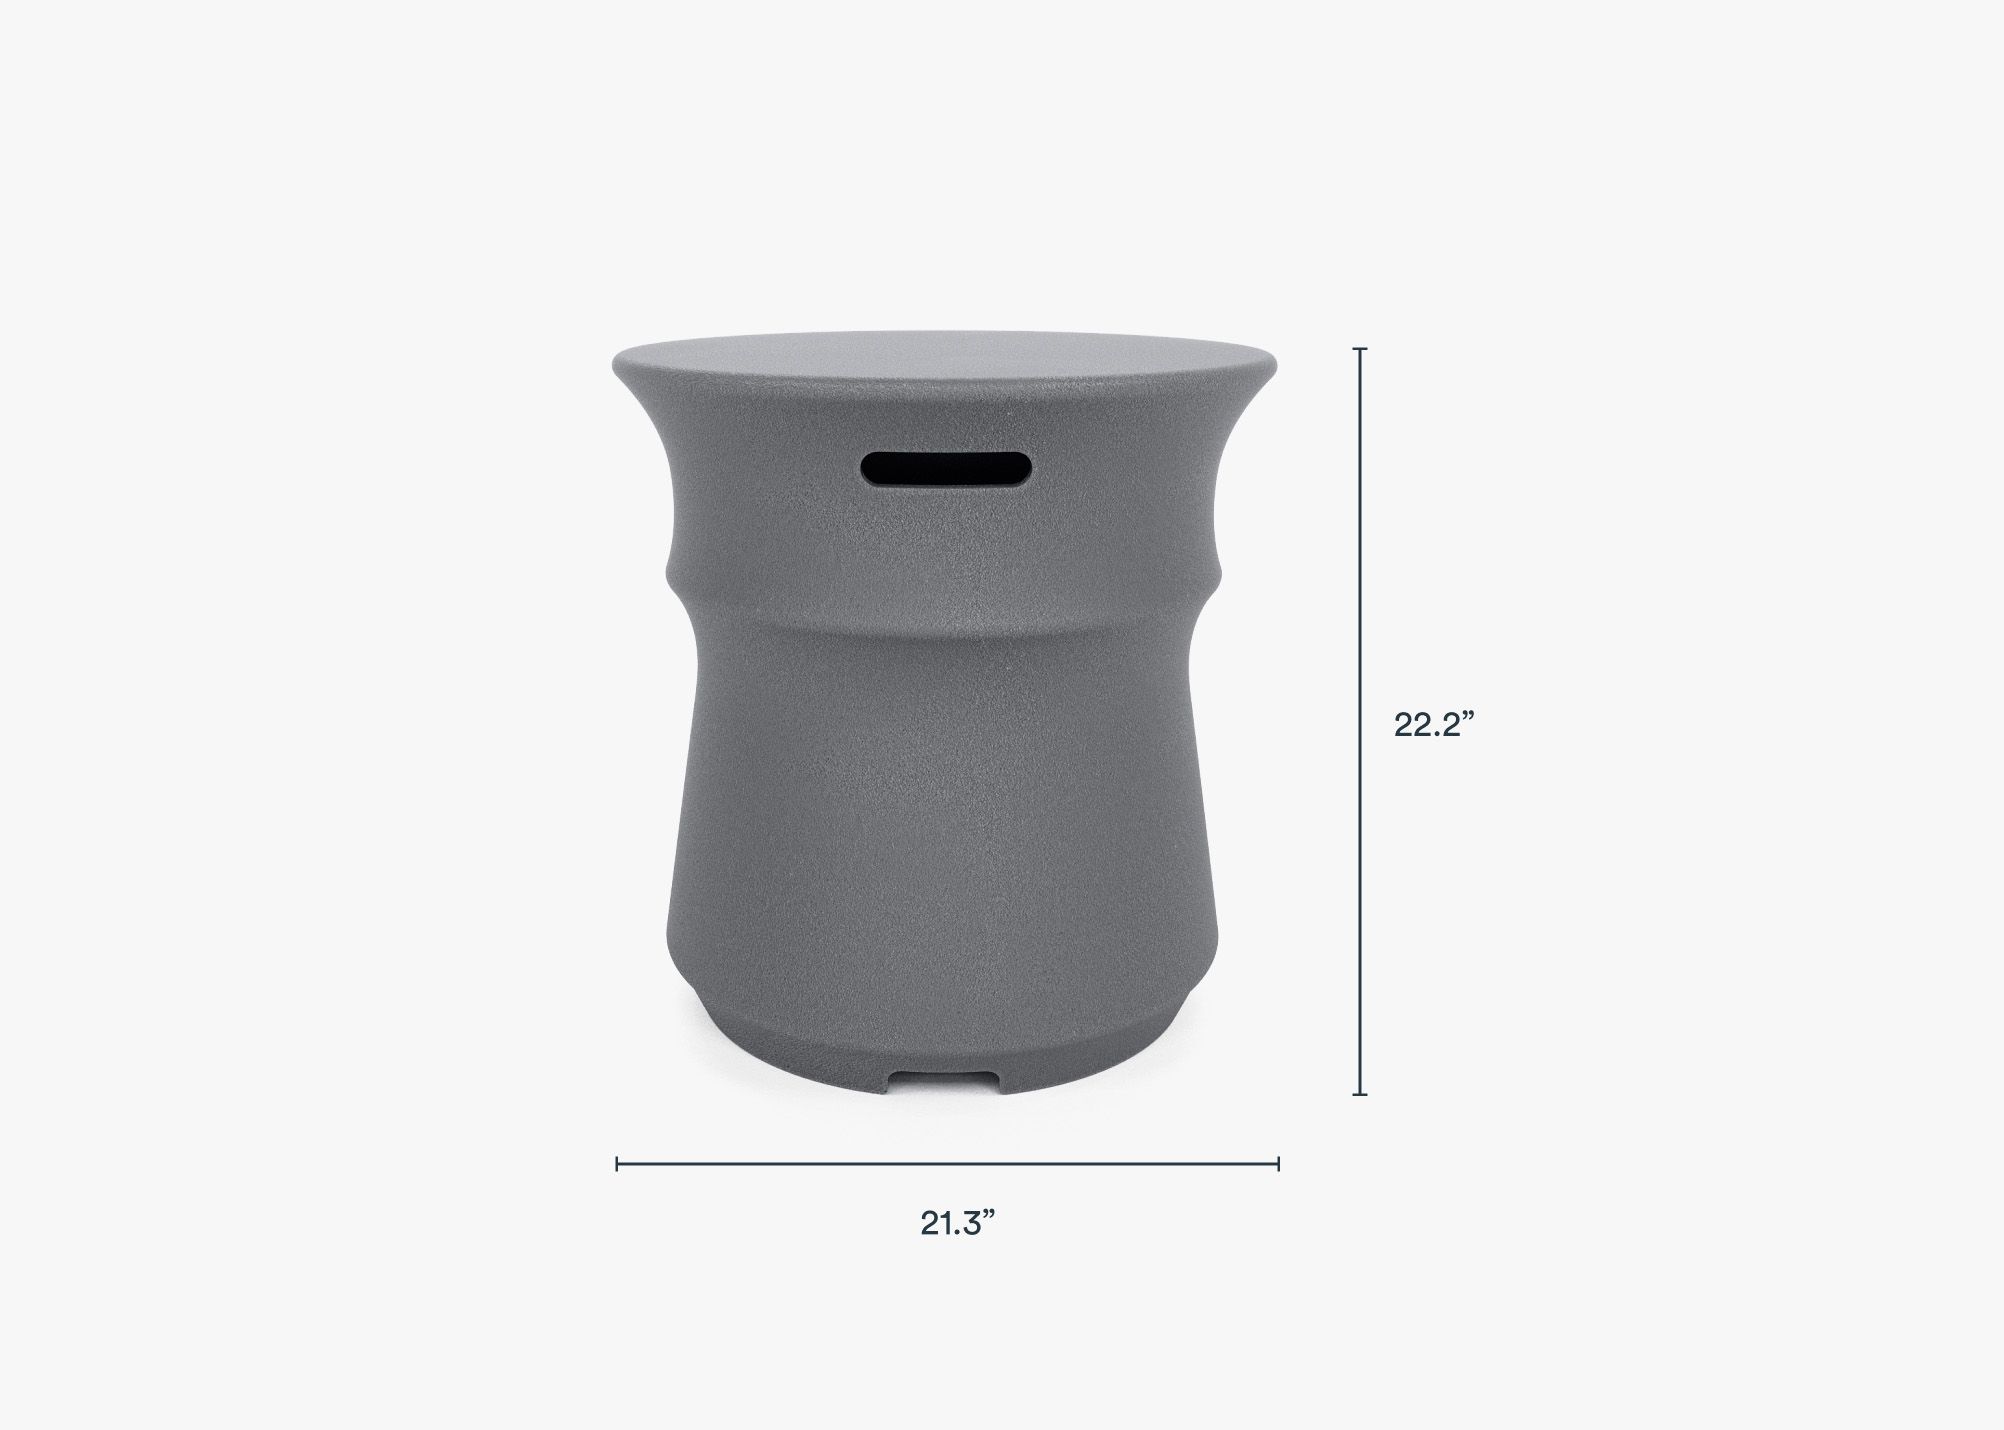 Outer's propane tank cover dimensions in inches, also listed under Dimensions & Weights.